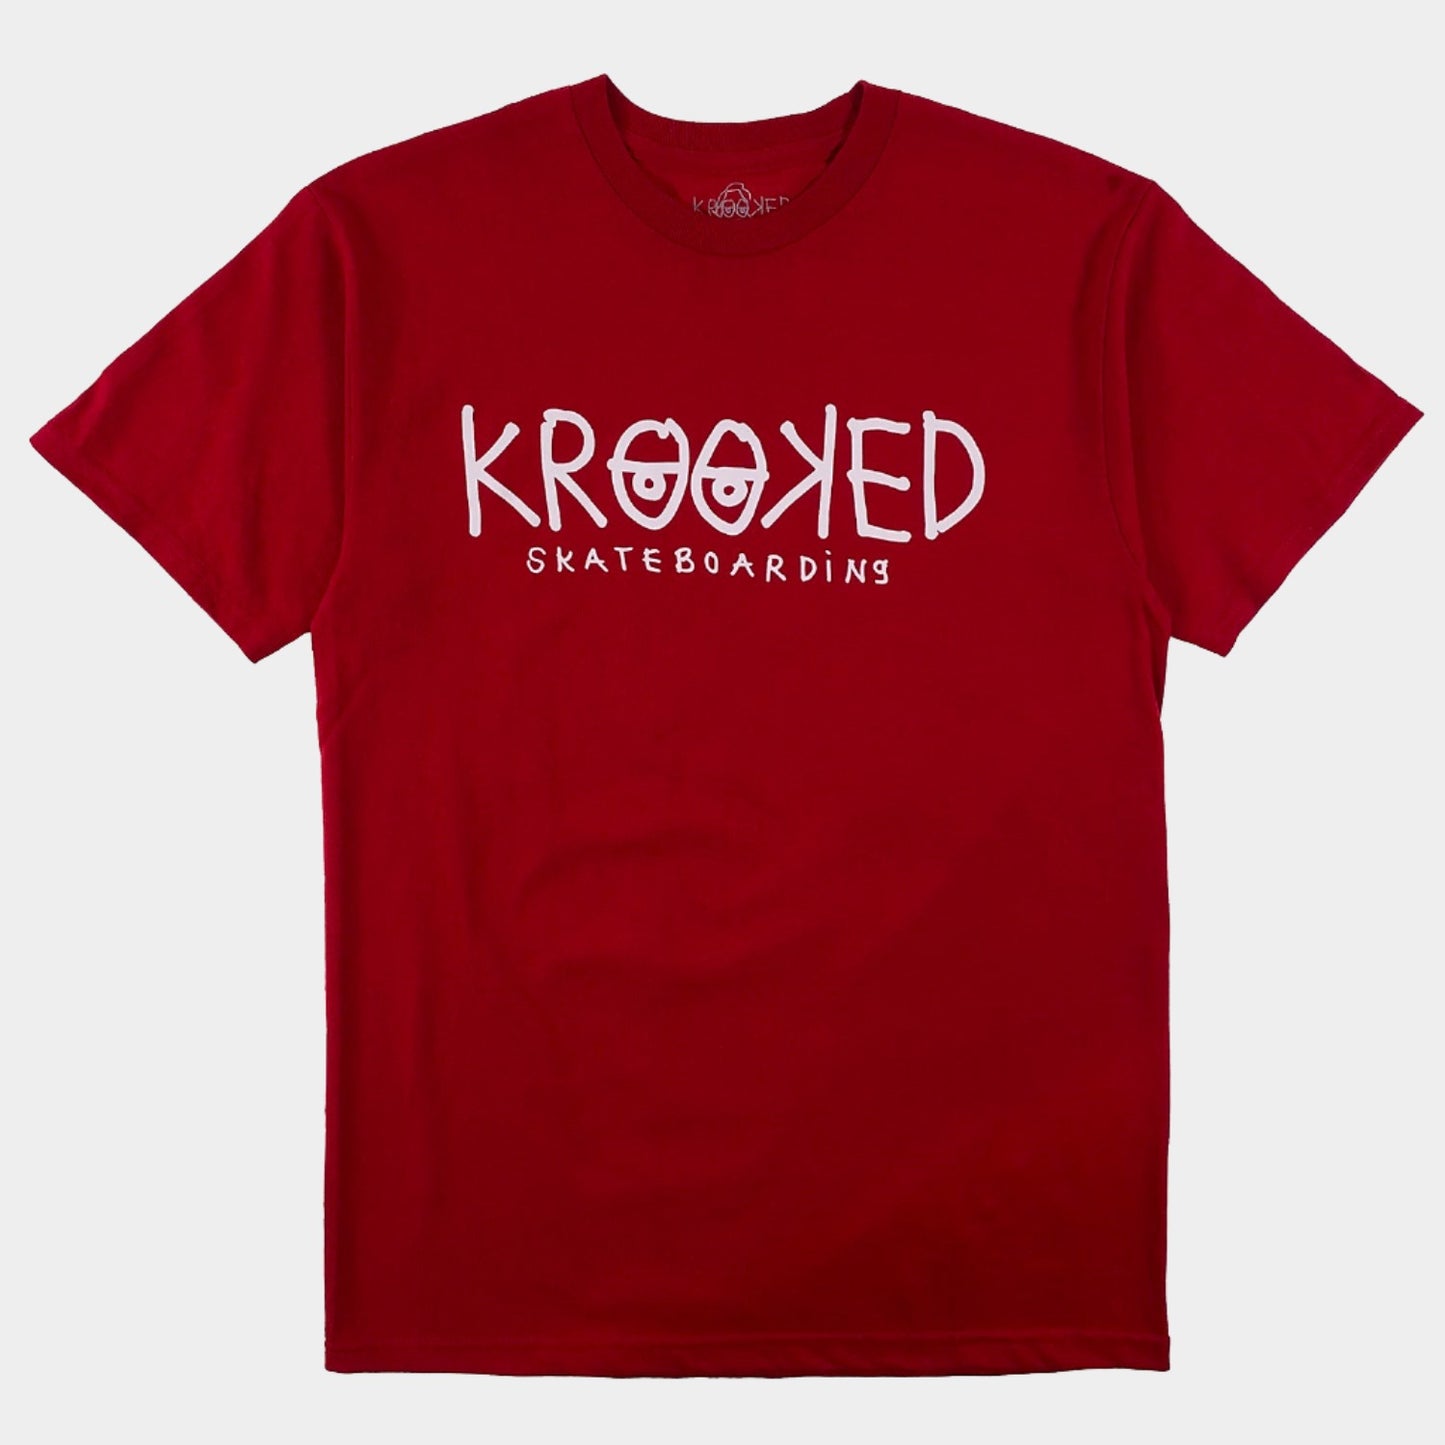 Krooked Eyes T-Shirt - Cardinal / White - Prime Delux Store